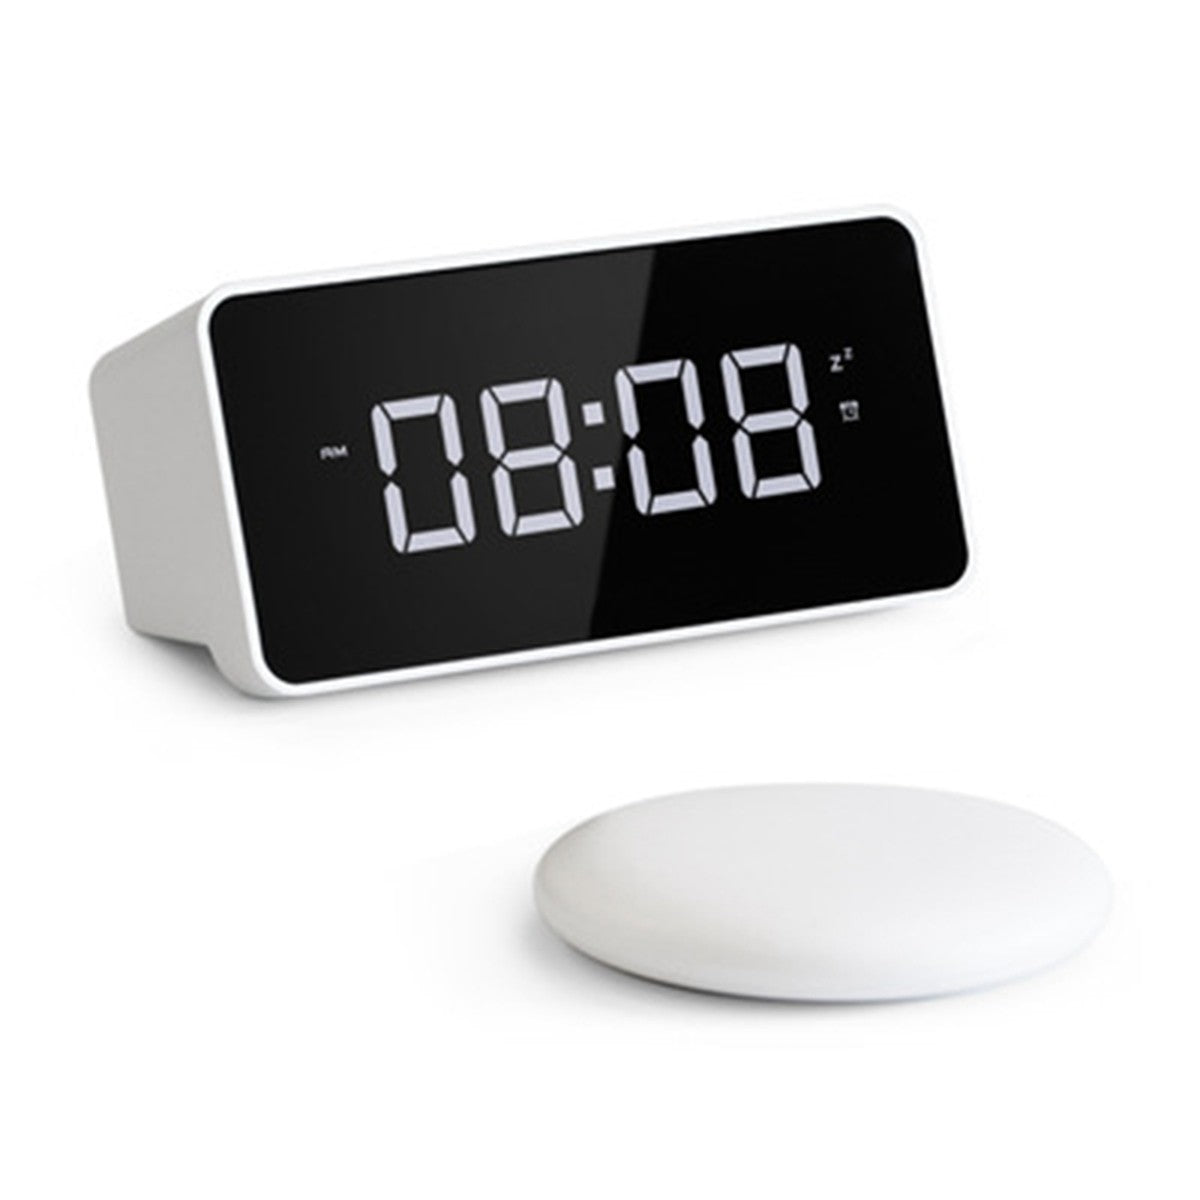 DQ V2 Alarm Clock with Wireless Vibrating Bed Shaker